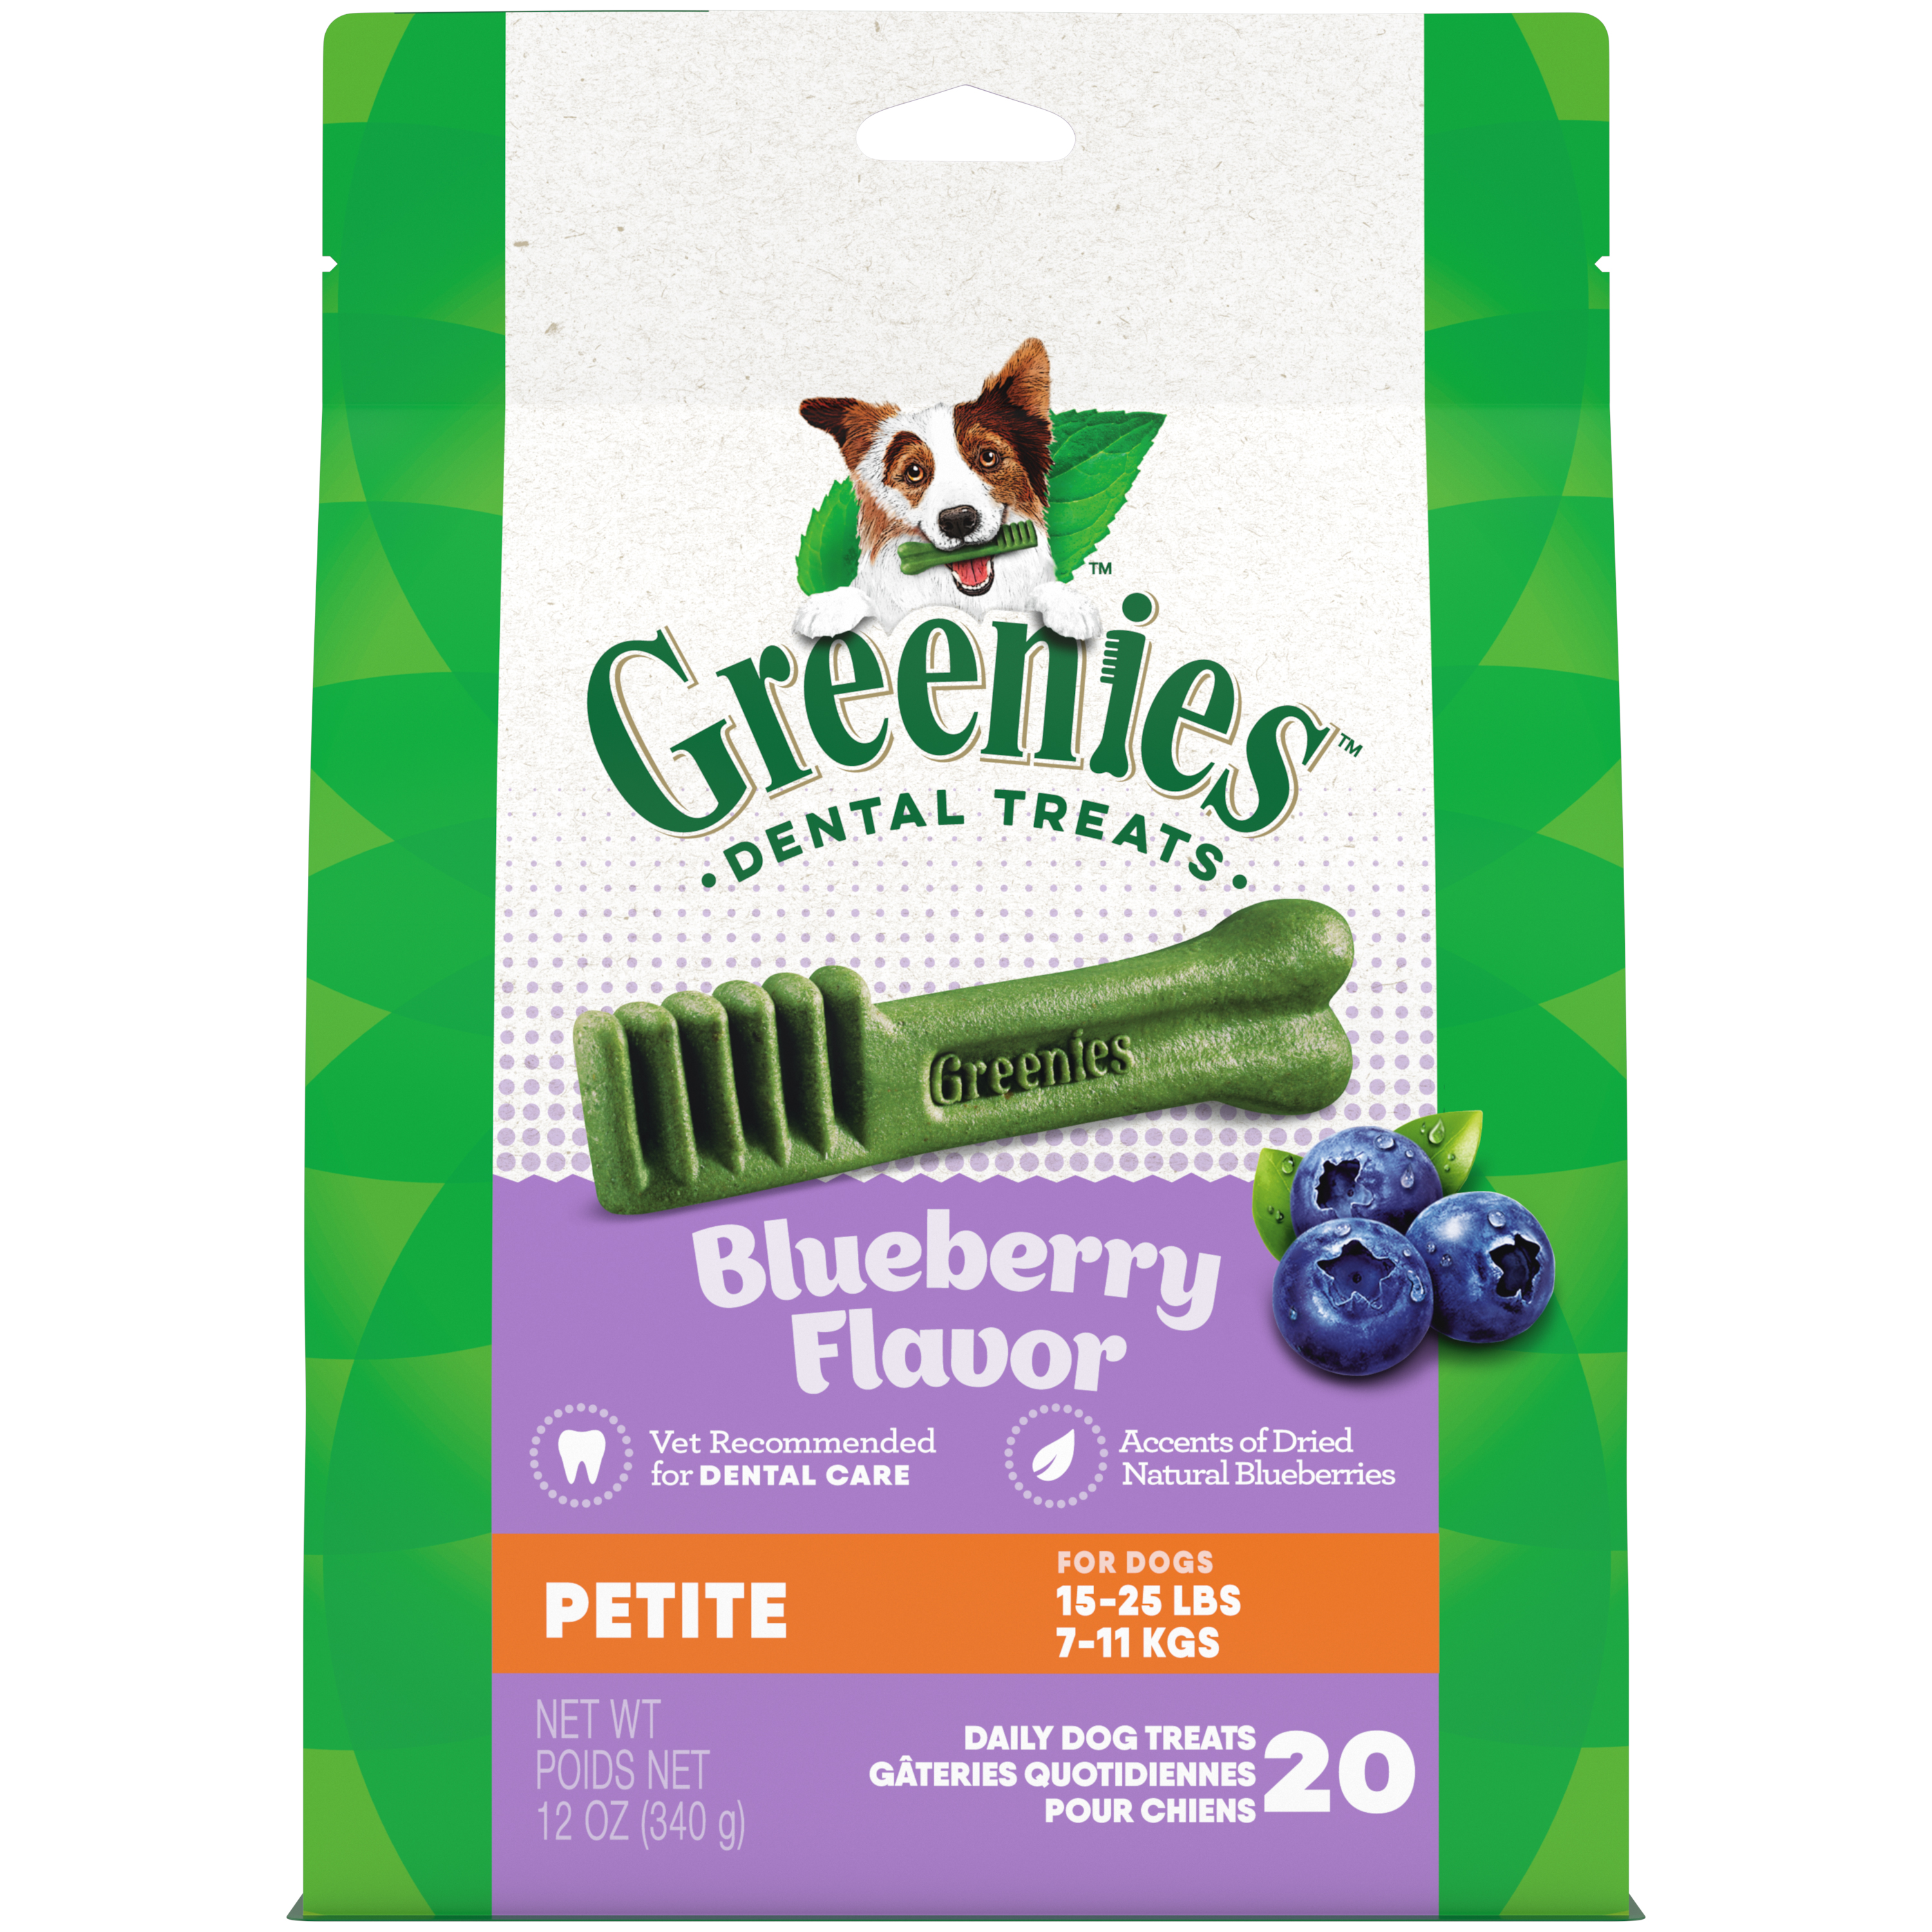 12 oz. Greenies Petite Blueberry Treat Pack - Health/First Aid